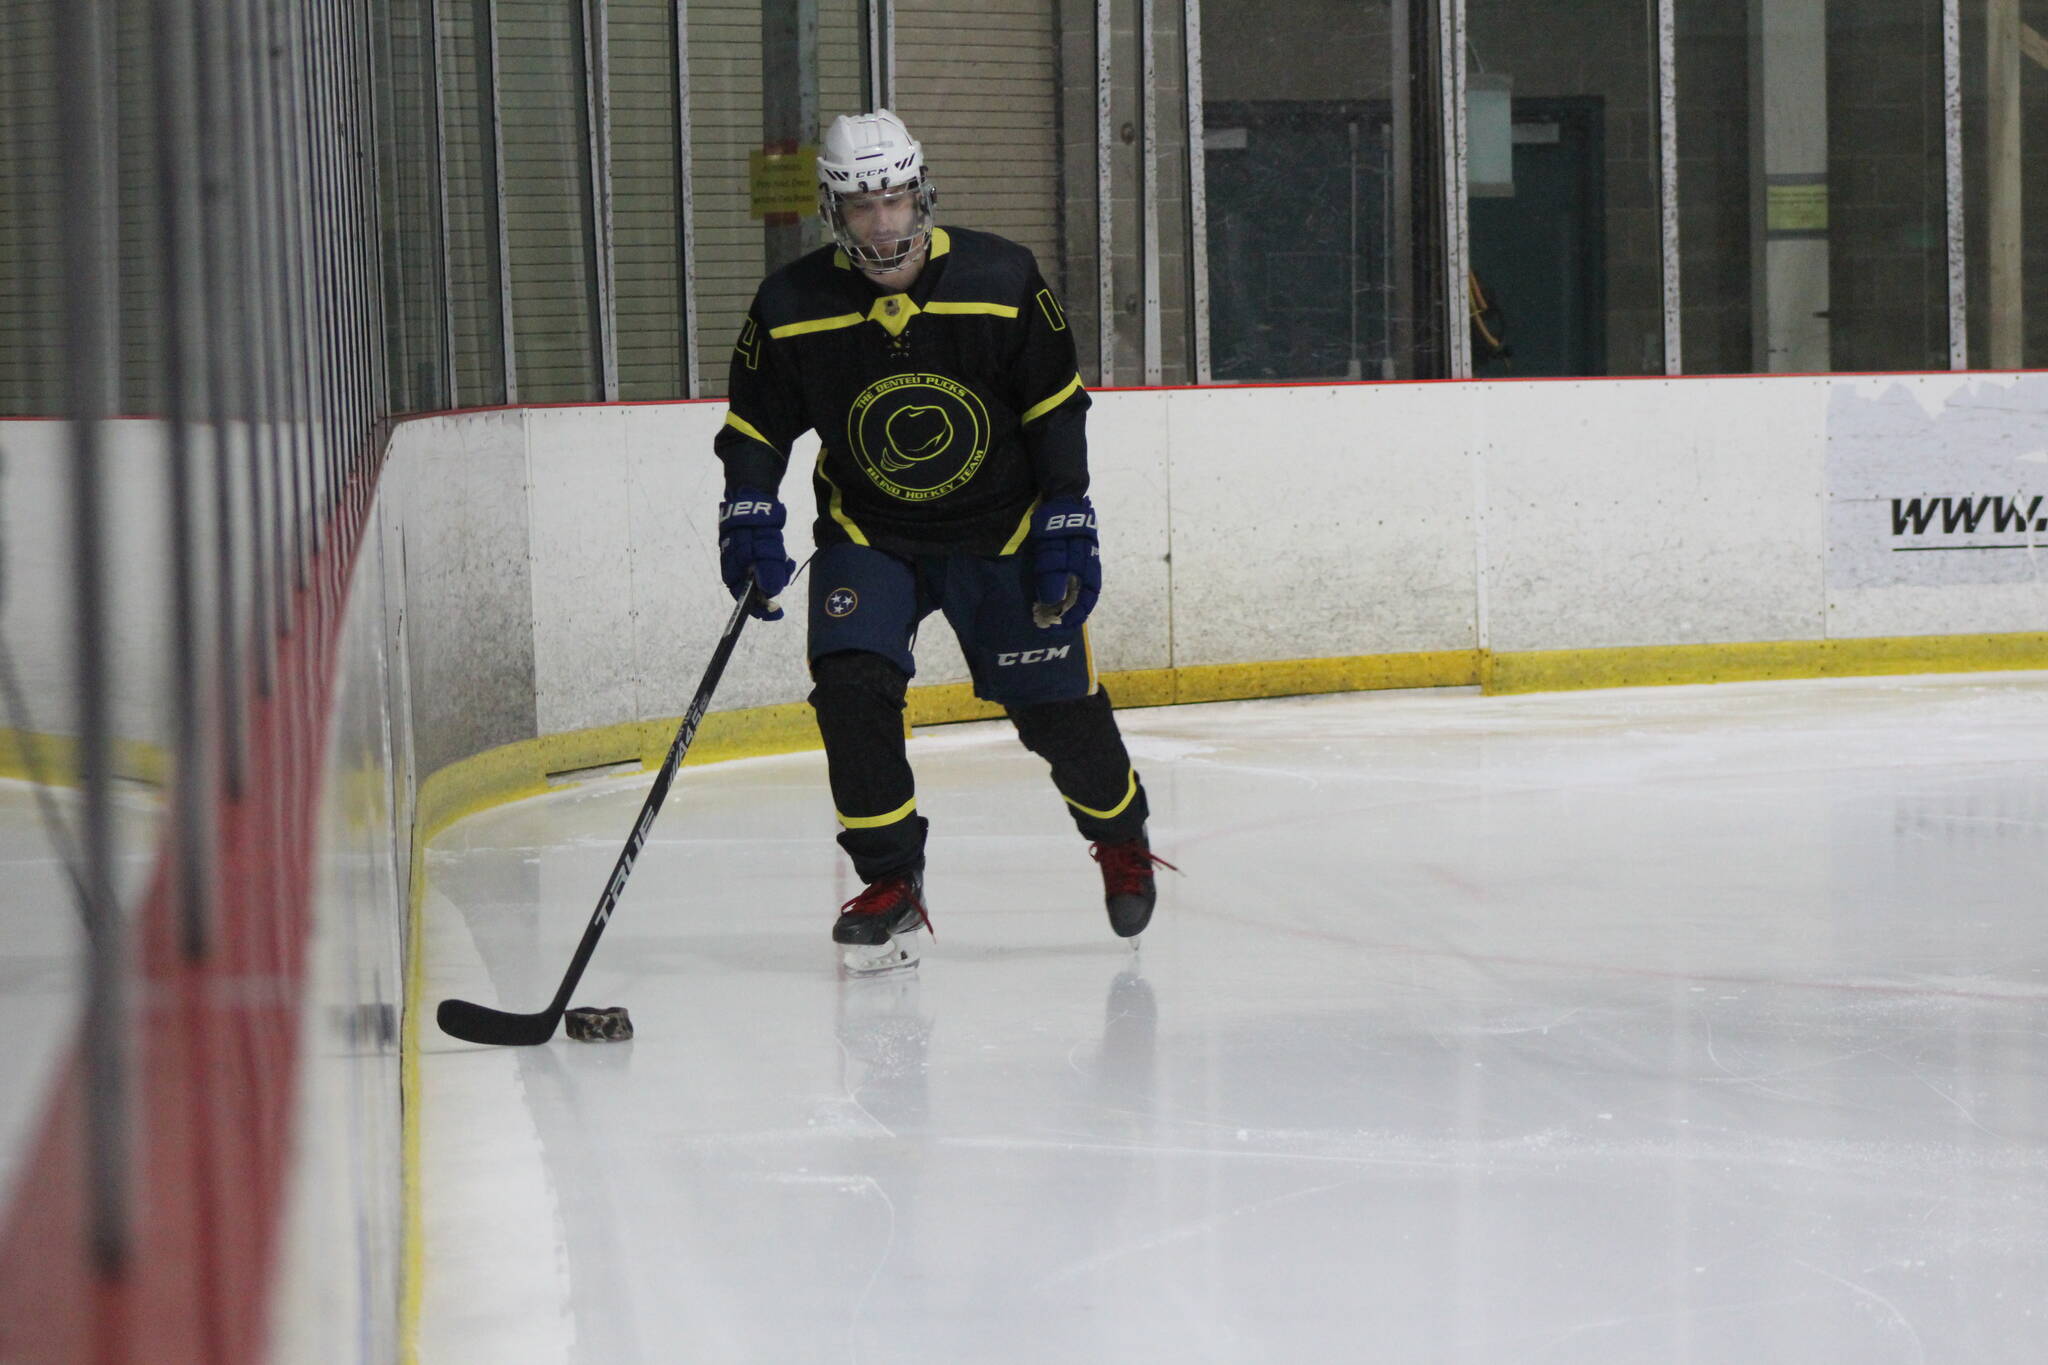 Adam Young trains at the Kent Valley Ice Centre a few days a week. Photo by Bailey Jo Josie/Sound Publishing